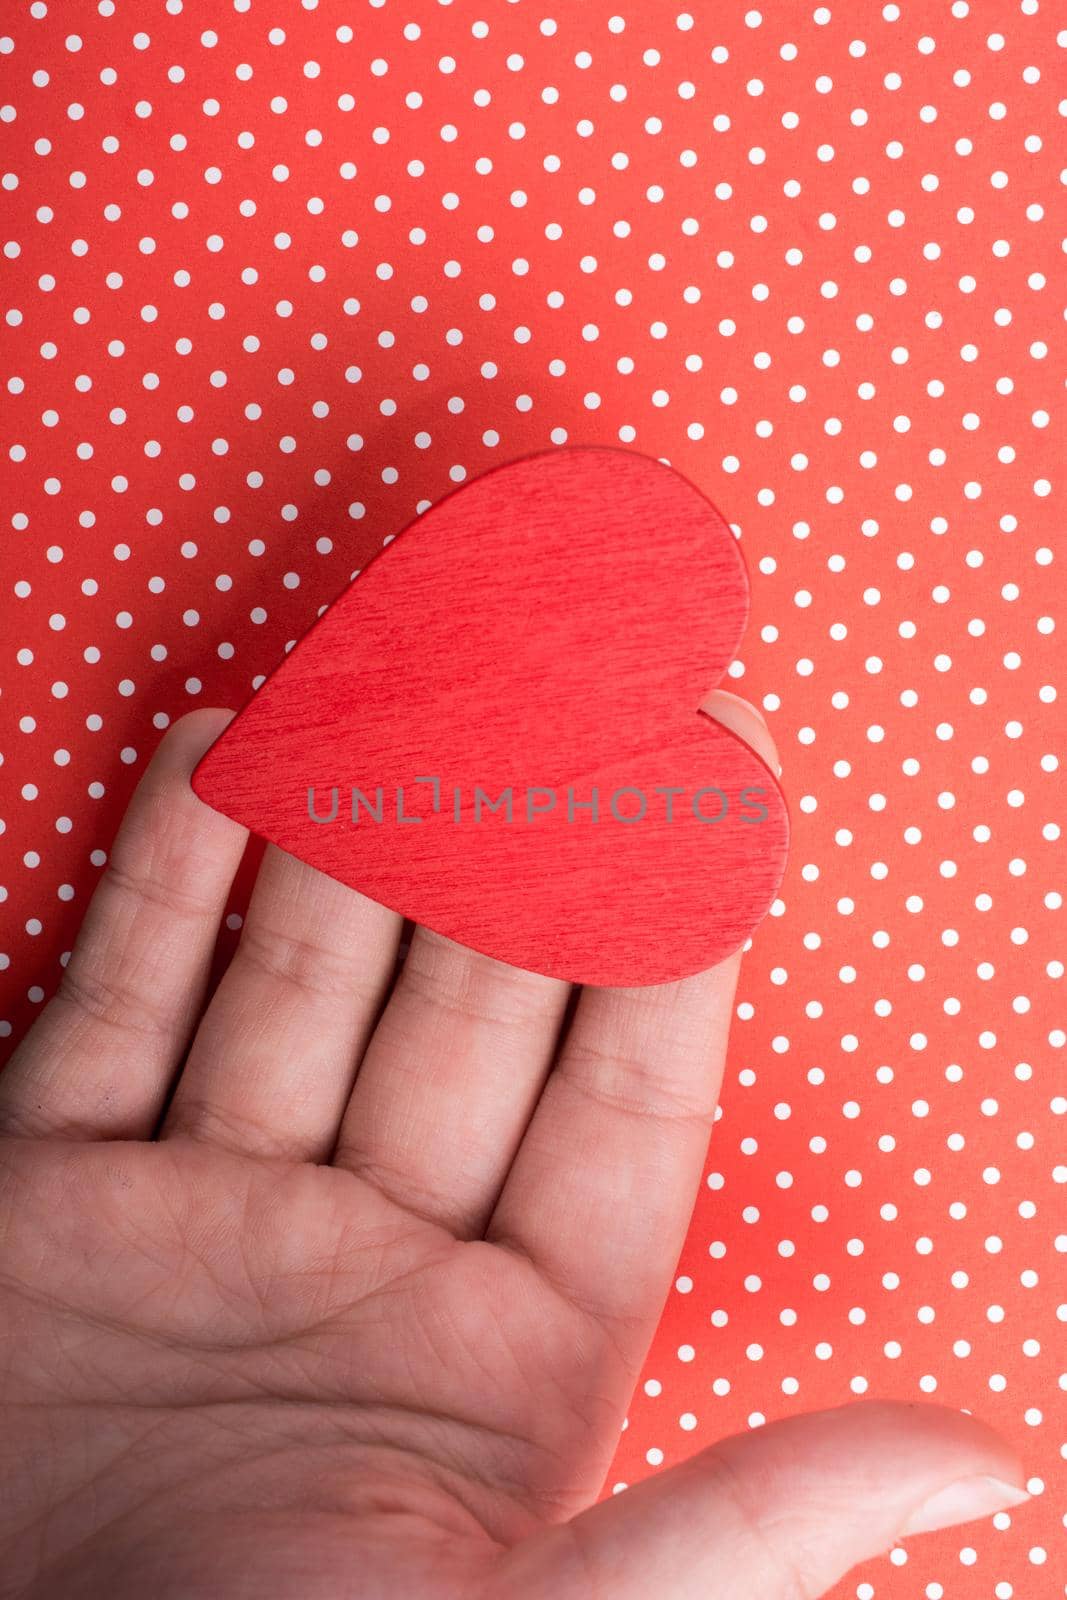 Red color heart shaped object in hand  on dotted paper